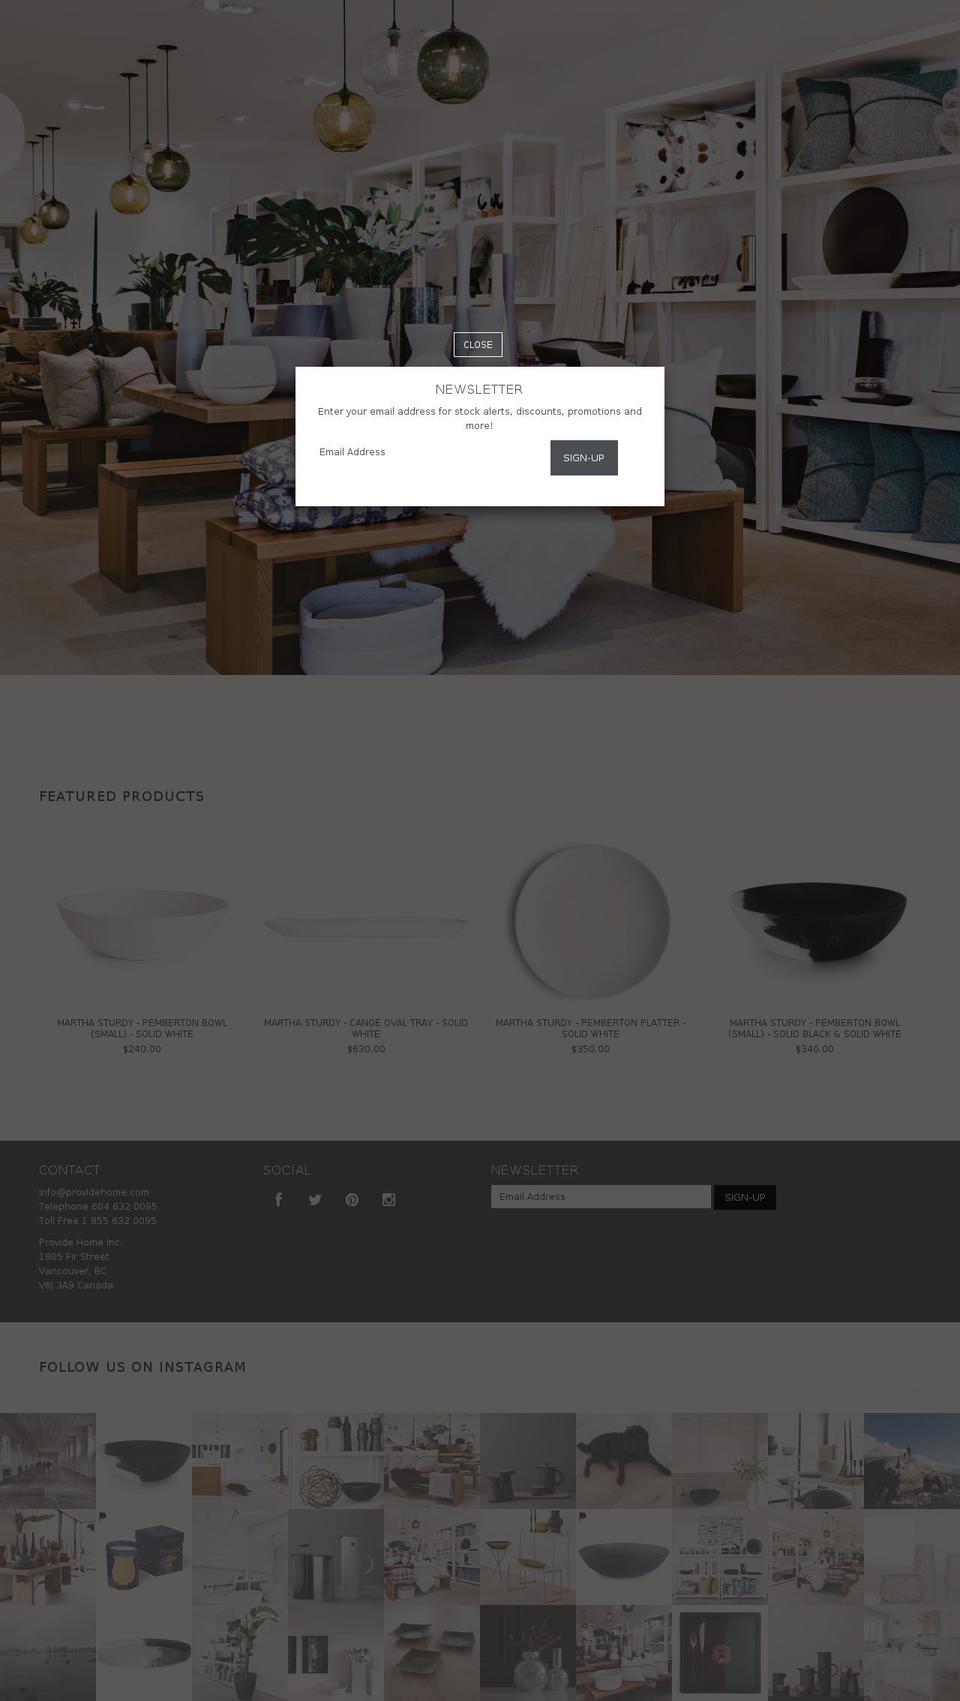 Beyond Shopify theme site example providehome.com